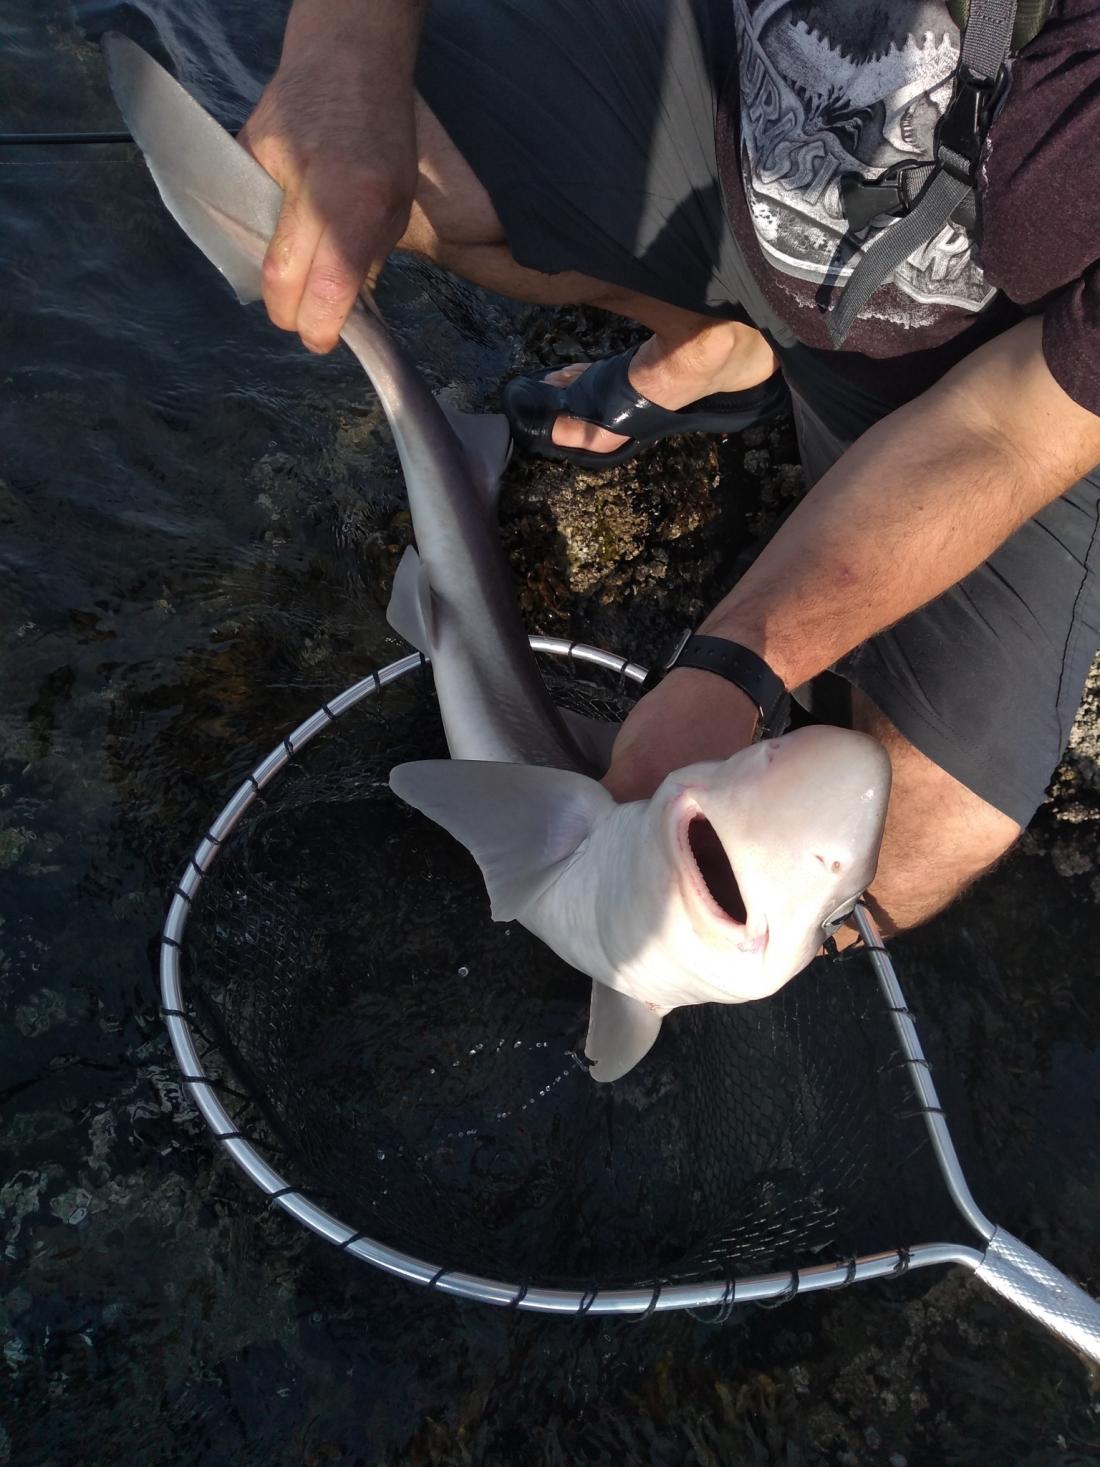 Spiny dogfish being held by fisherman, with a net underneath.